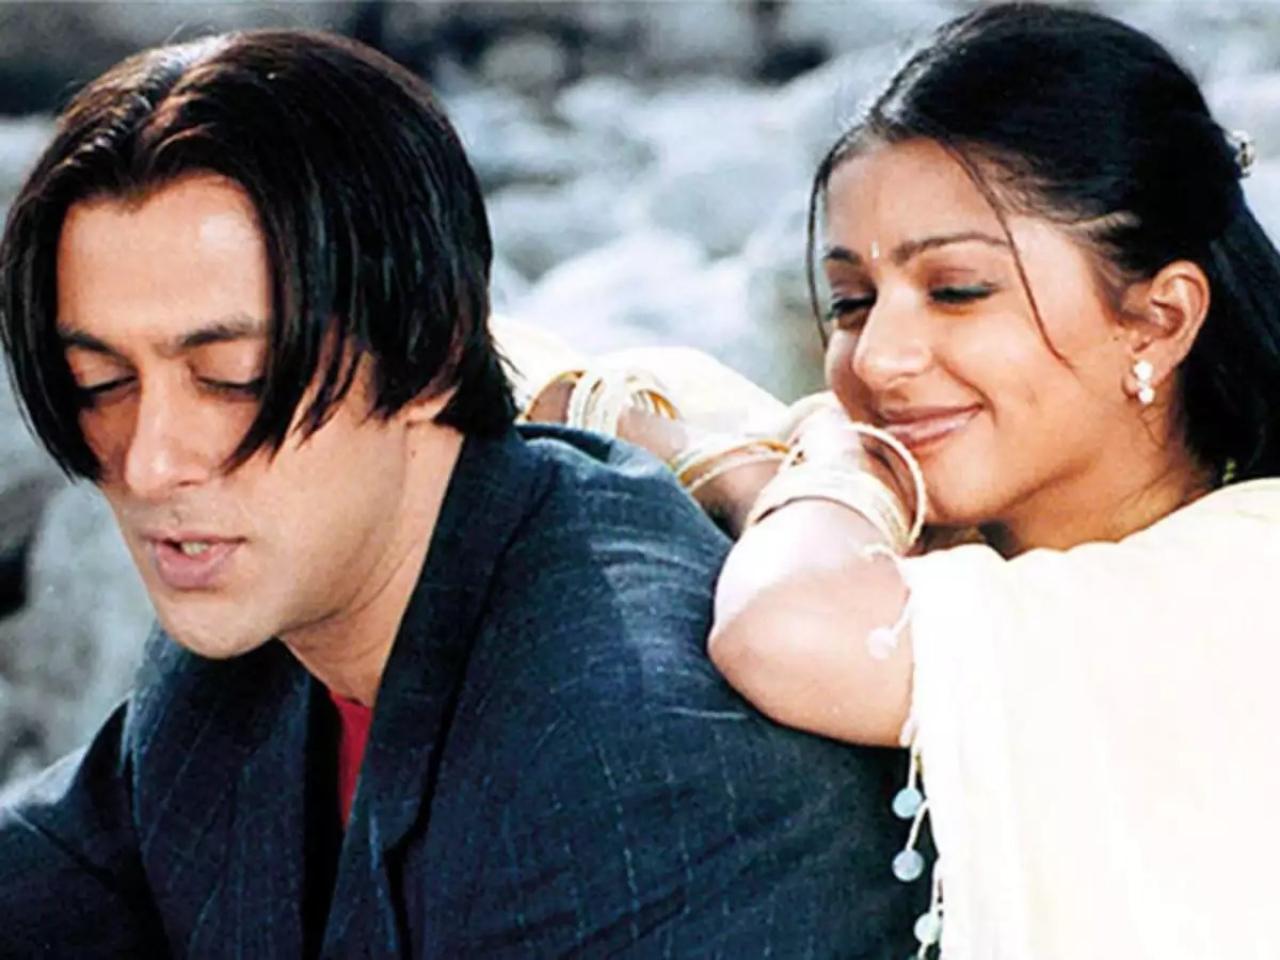 Tere Naam (2003) - The Satish Kaushik directed 'Tere Naam' starred bollywood actors Salman Khan and Bhumika Chawla. 'Tere Naam' is a remake of the Tamil film 'Sethu' (1999). Radhey, a poor Hindu with a bad temper often gets into fights but one of these fights lands him into a hospital with amnesia inducing head injuries. At this time, a woman he was in love with enters his life again.